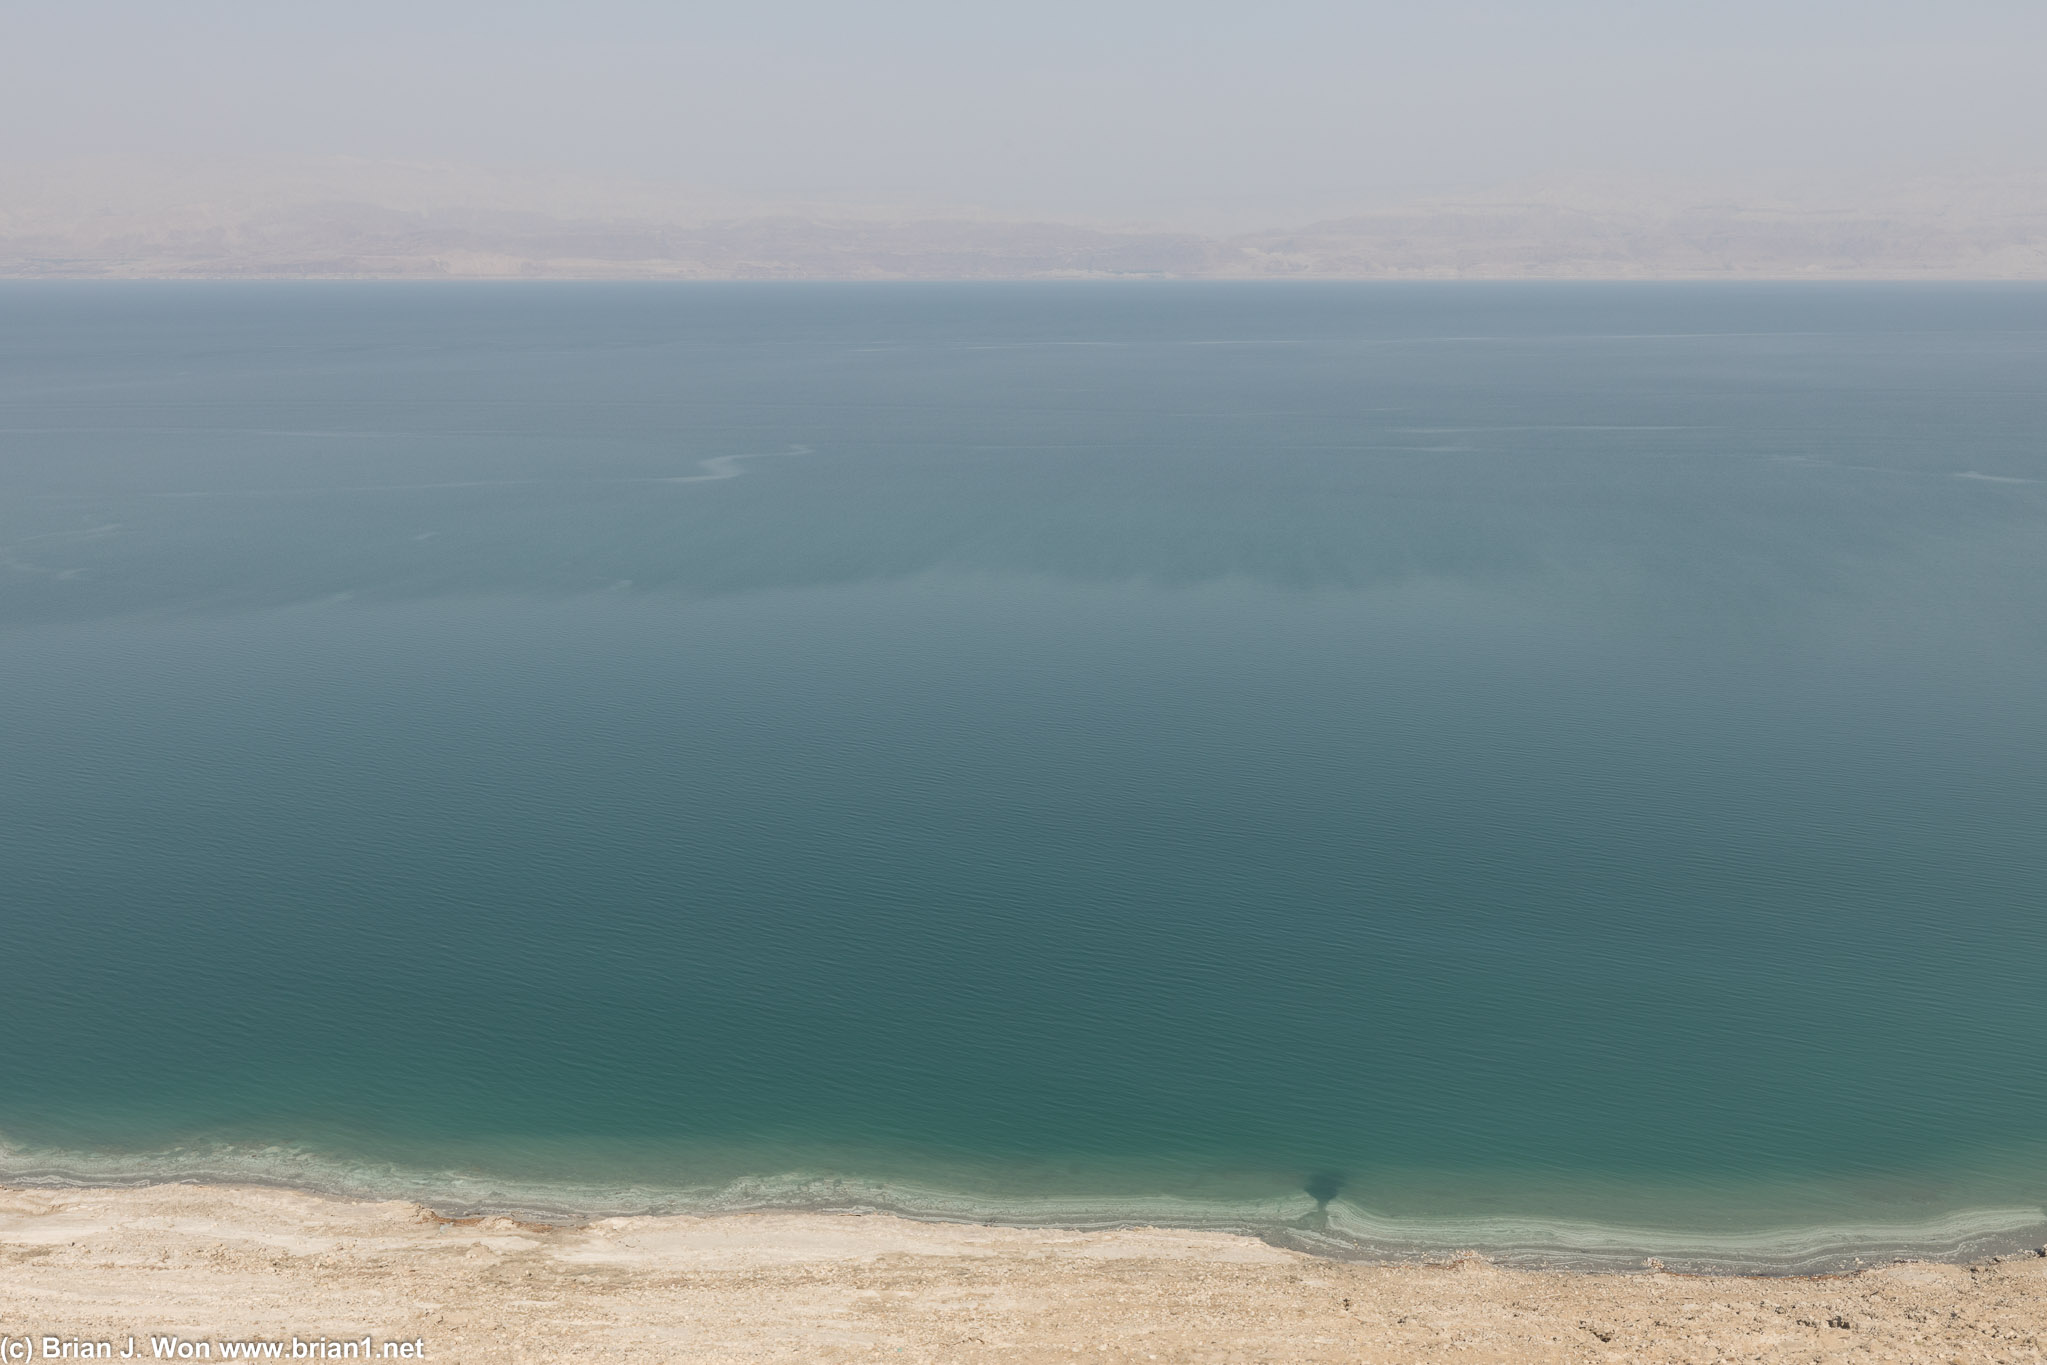 Heading north up the western edge of the Dead Sea.